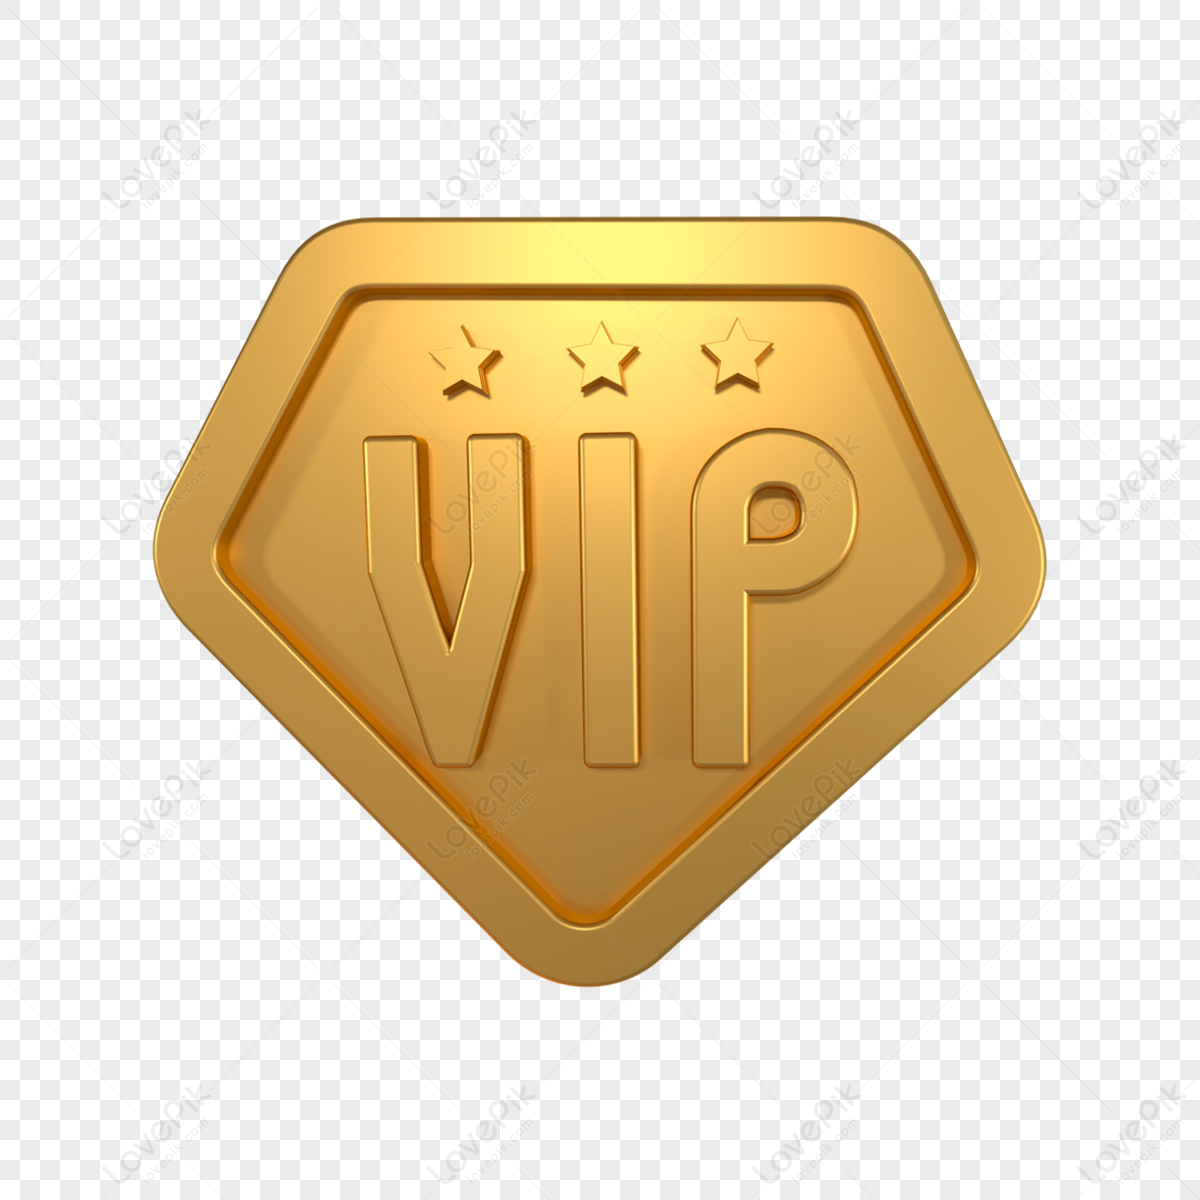 Vip Logo Vector Images (over 7,300)